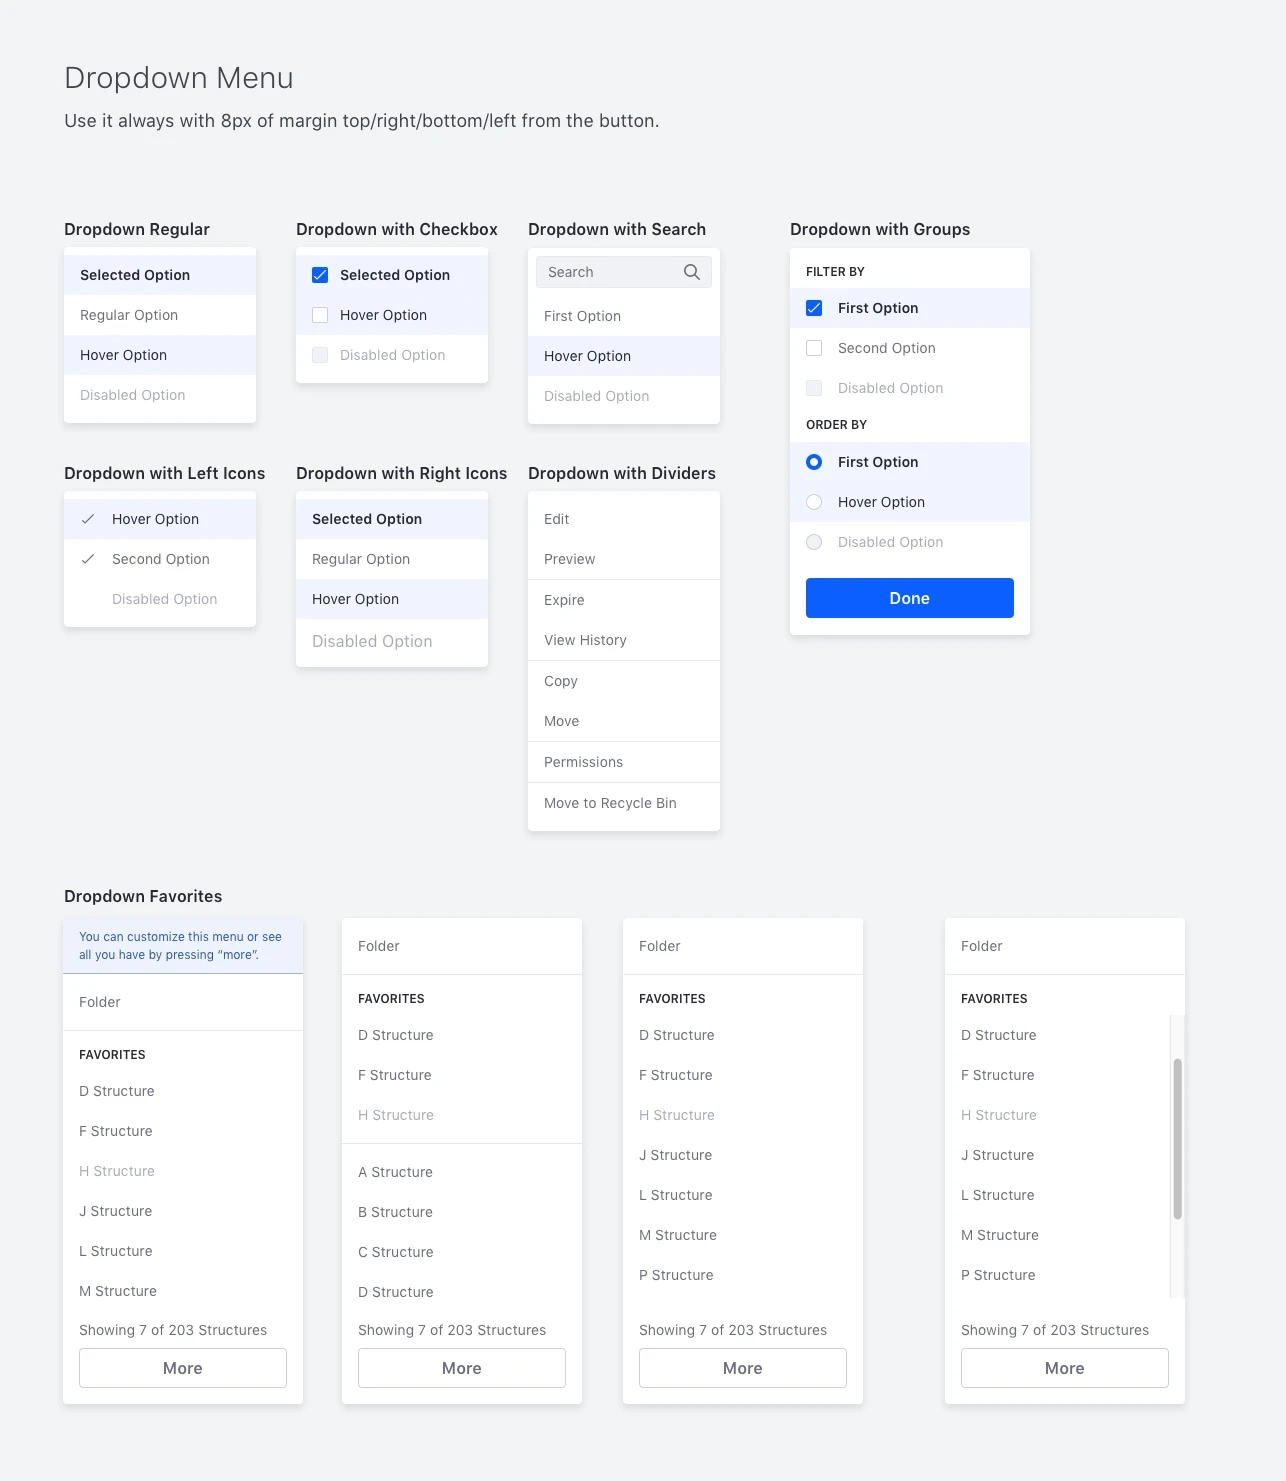 Lexicon - Lexicon is a set of principles, patterns and tools created to provide a common design framework for crafting user interfaces within Liferay product ecosystem.